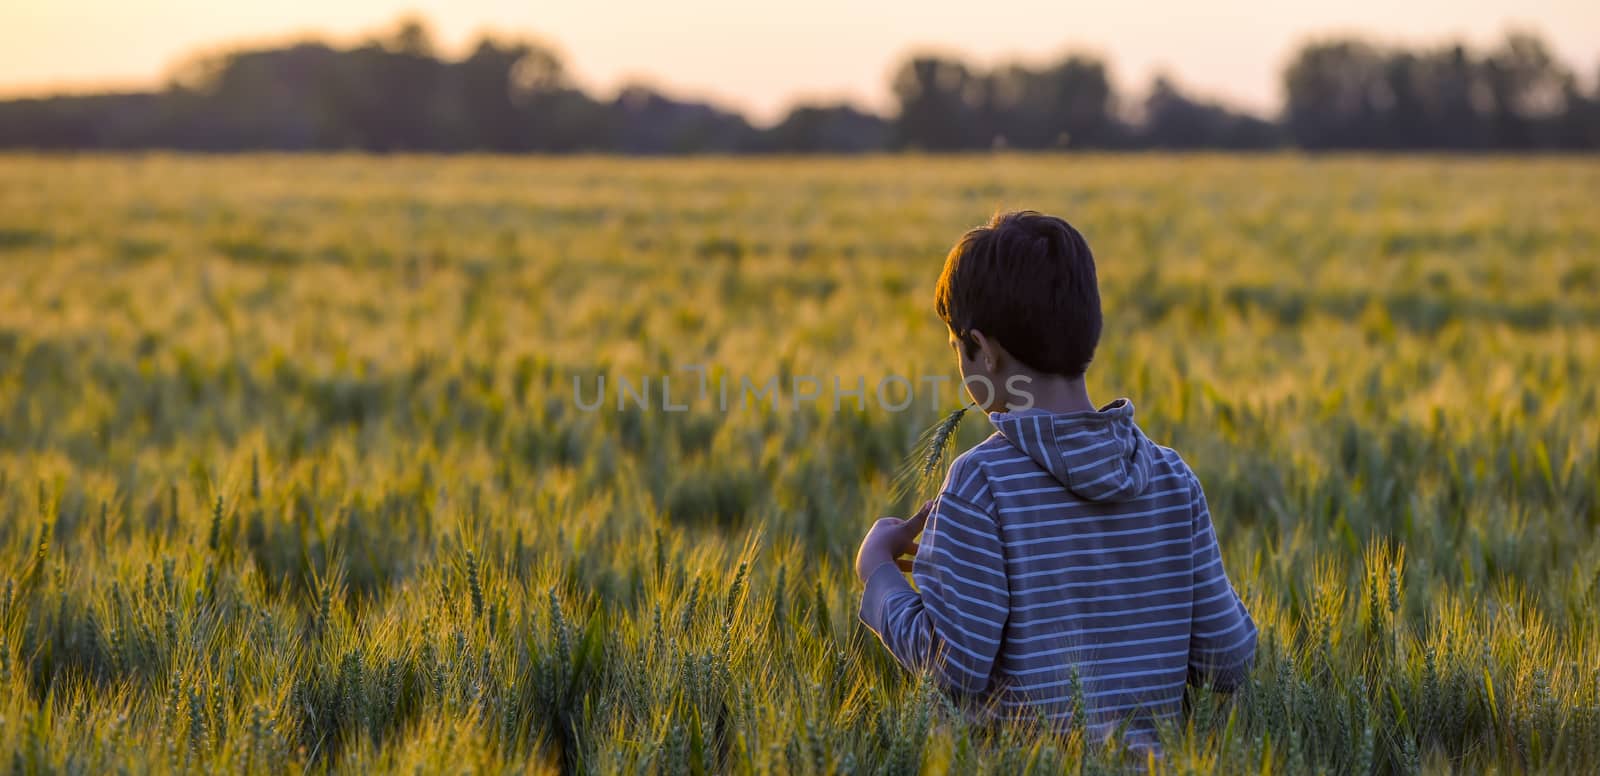 Little boy through a wheat field at sunset by FreeProd